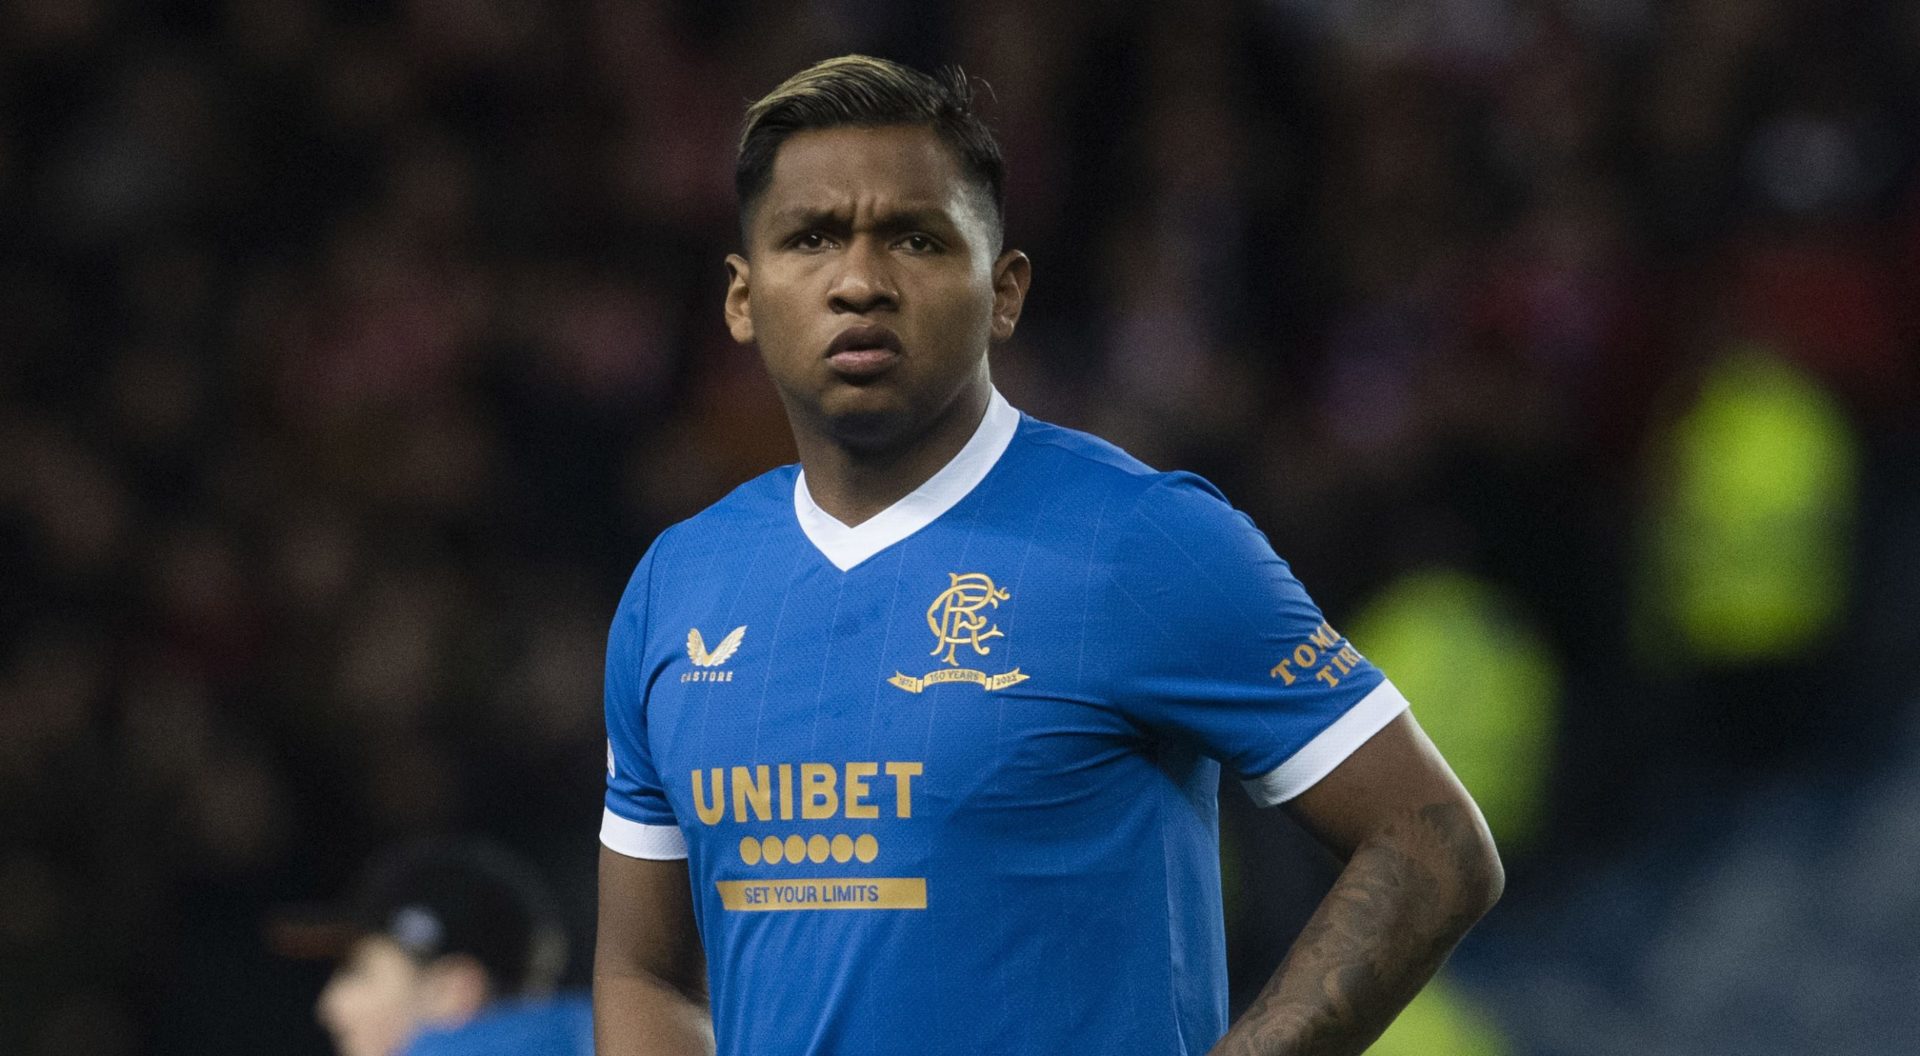 Injury forces Alfredo Morelos to return to Rangers early from international duty